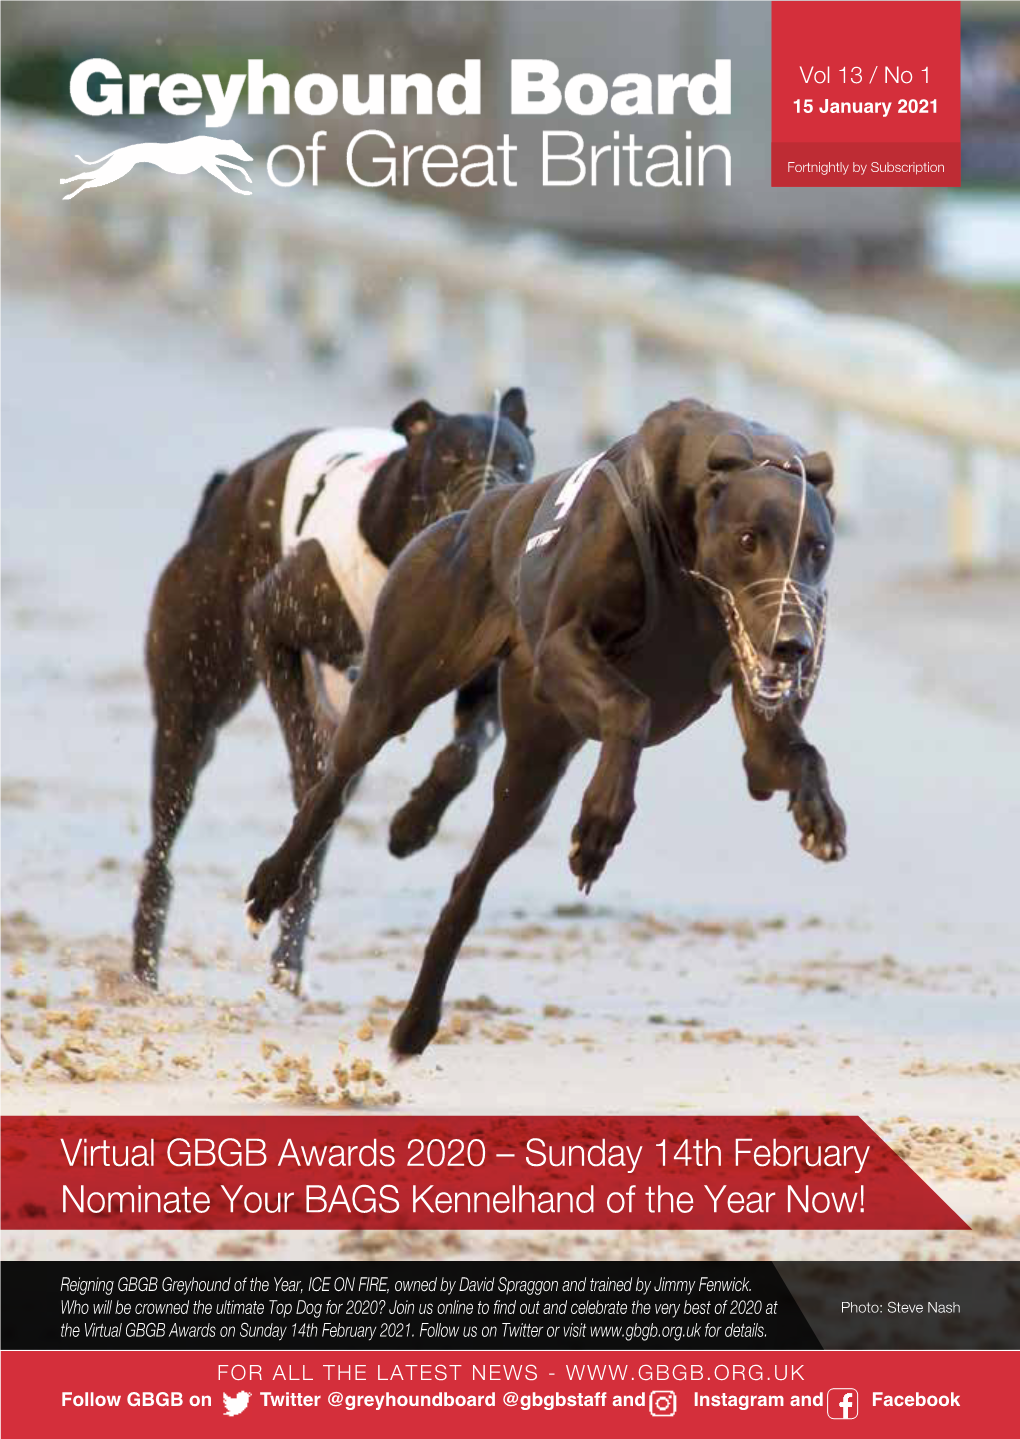 Virtual GBGB Awards 2020 – Sunday 14Th February Nominate Your BAGS Kennelhand of the Year Now!